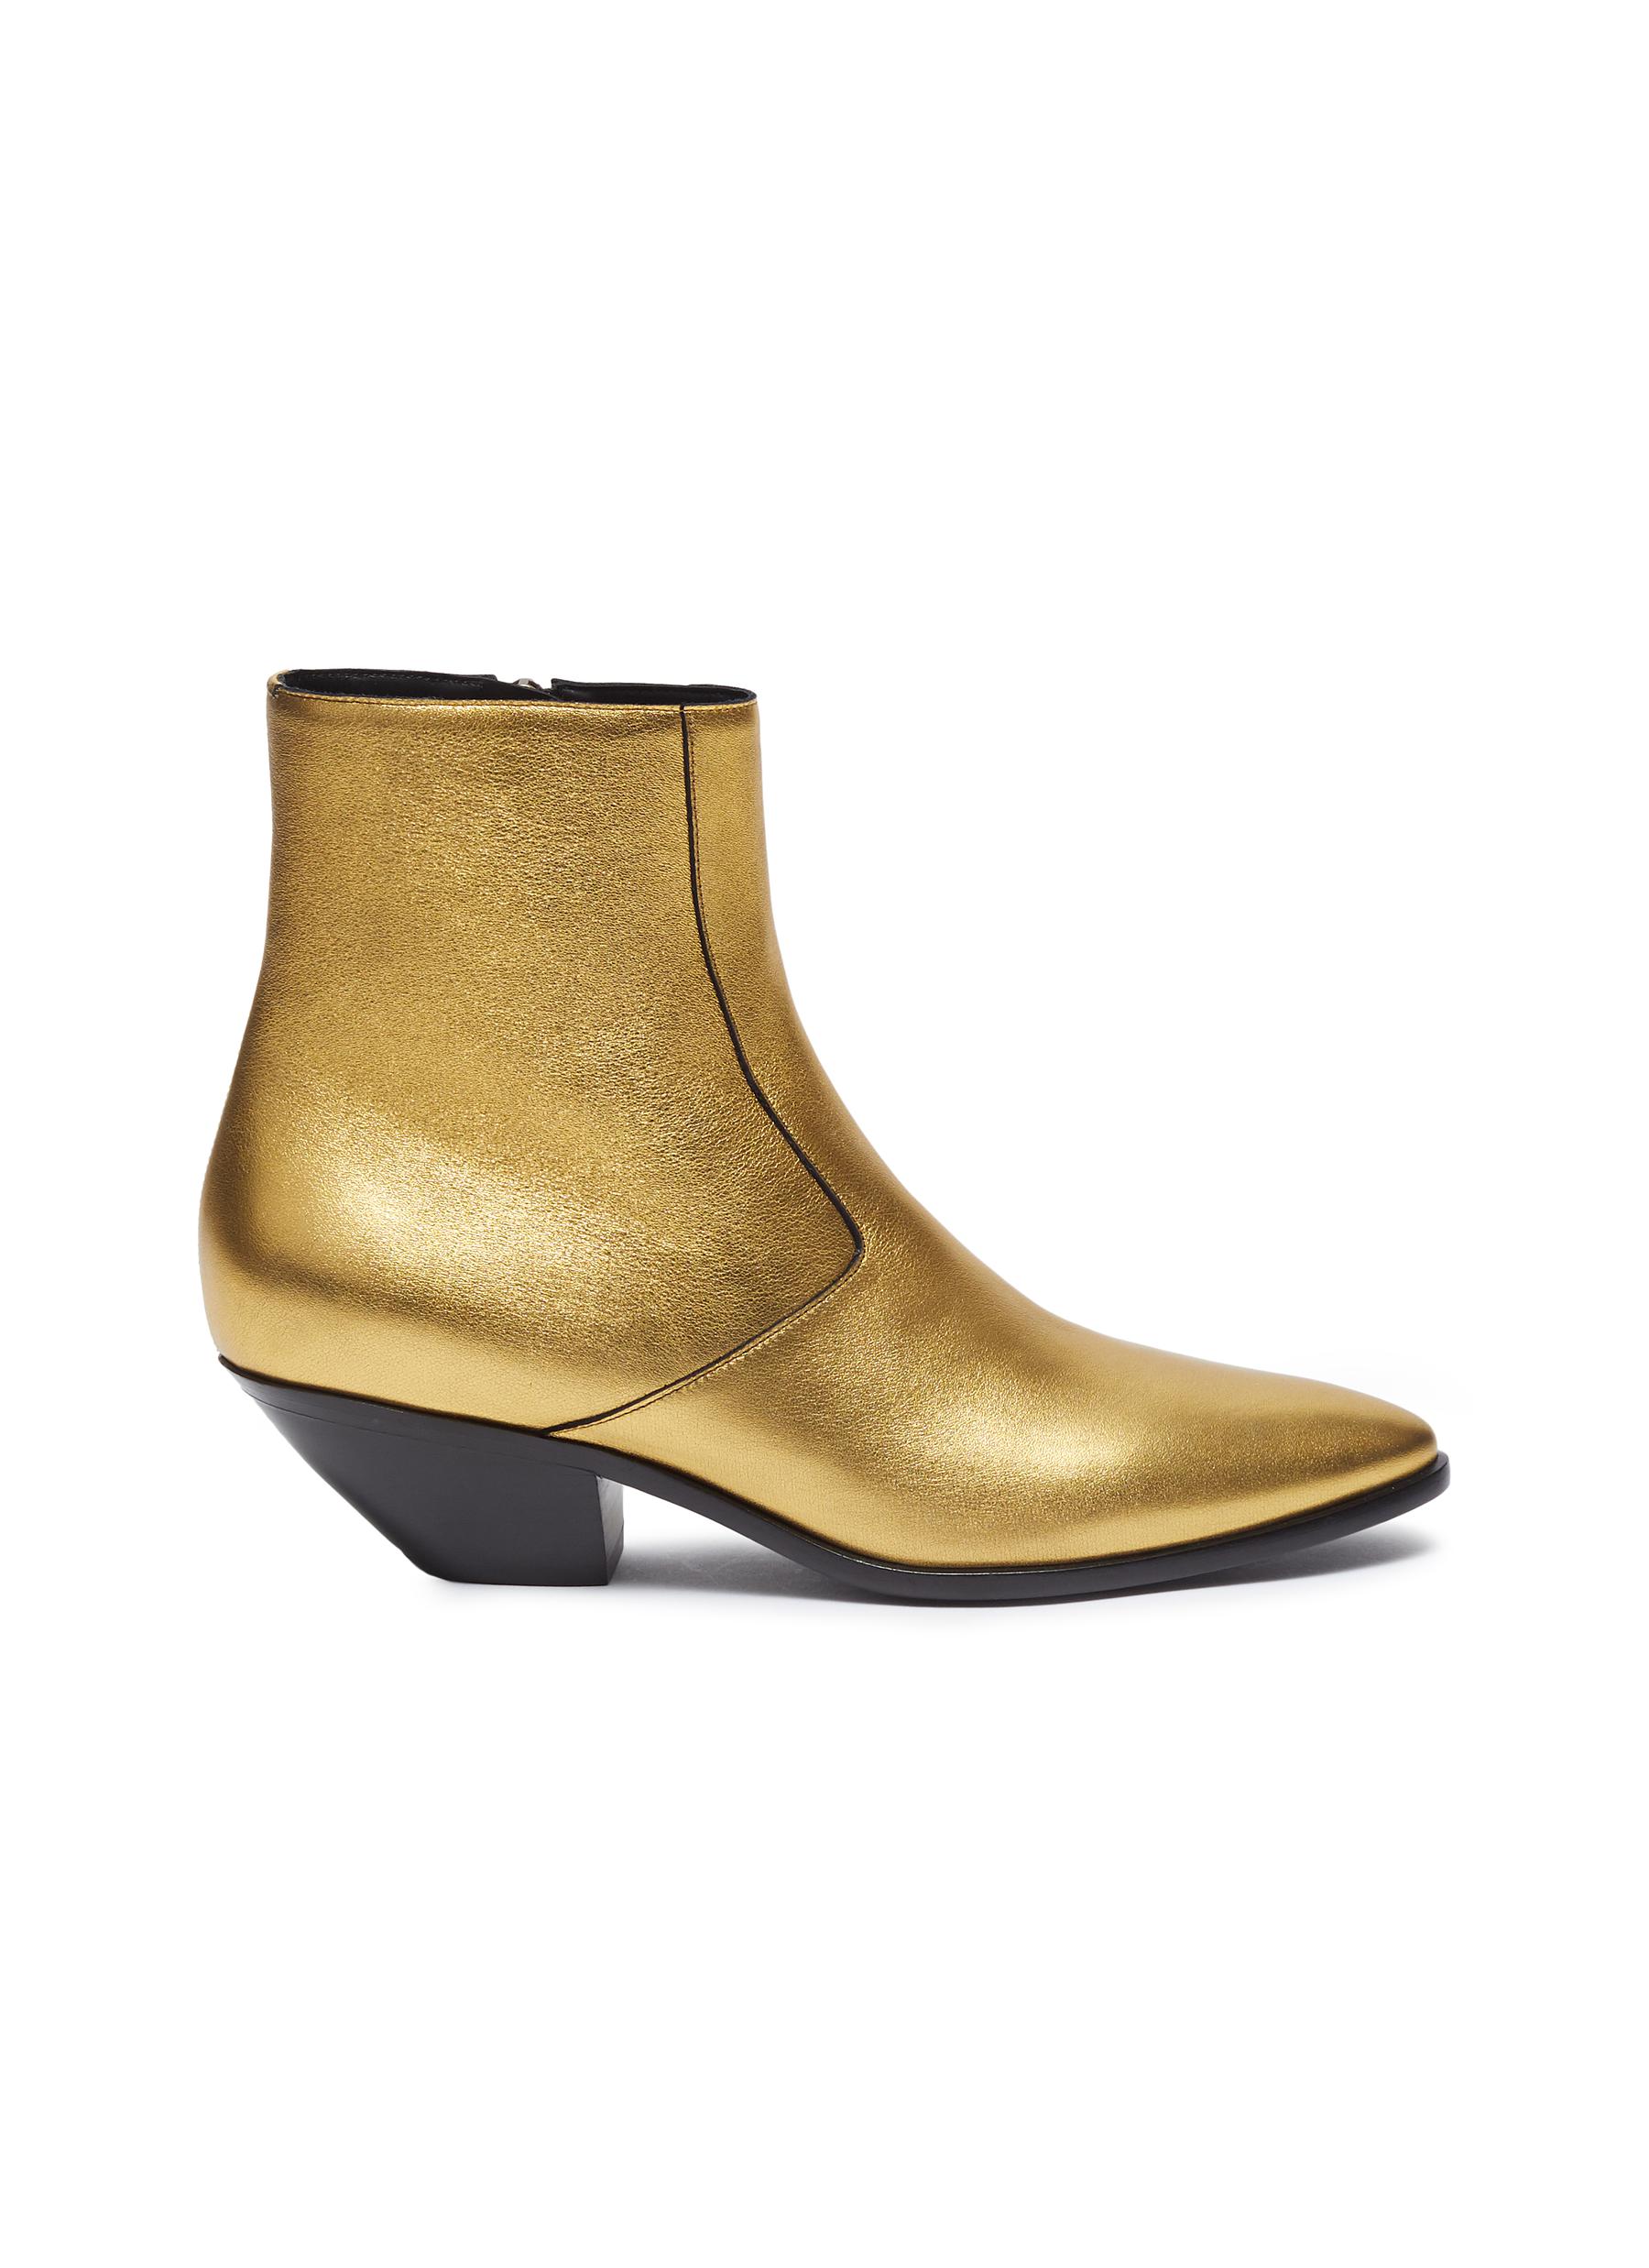 West slanted heel metallic leather ankle boots by Saint Laurent ...